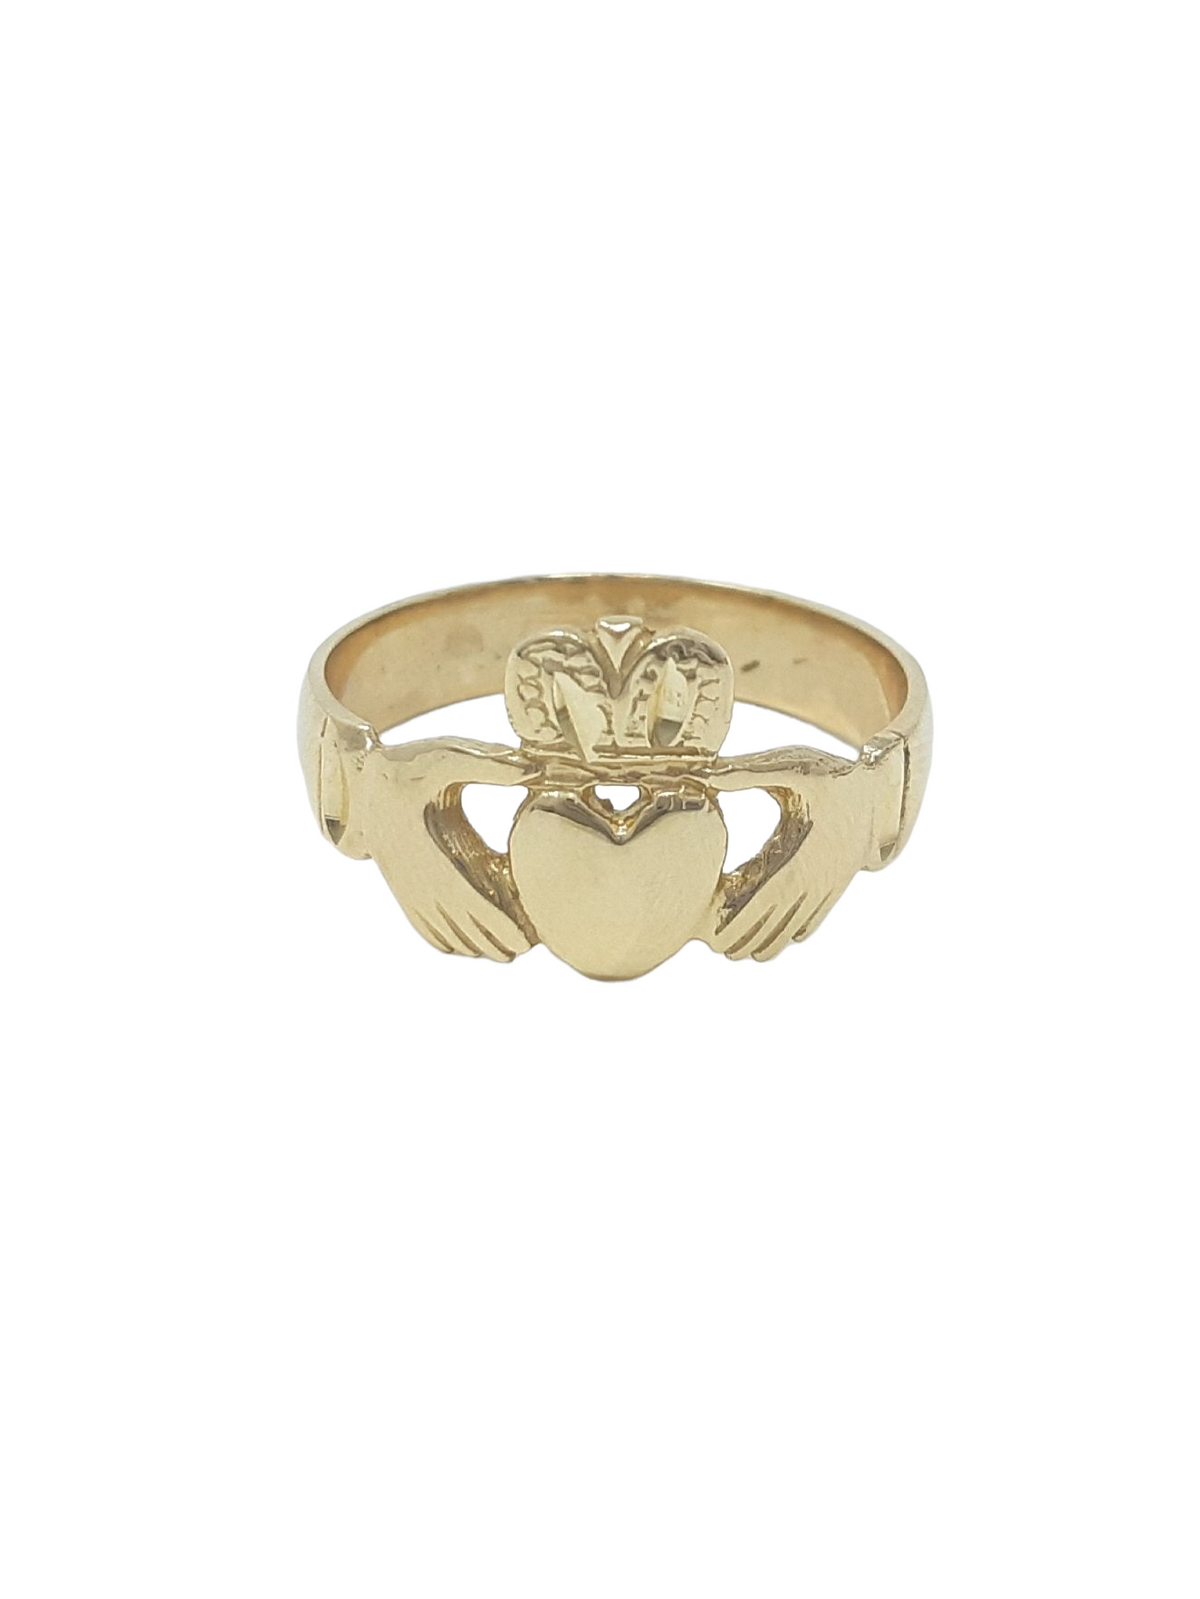 10K Yellow Gold Claddagh Ring, size 7